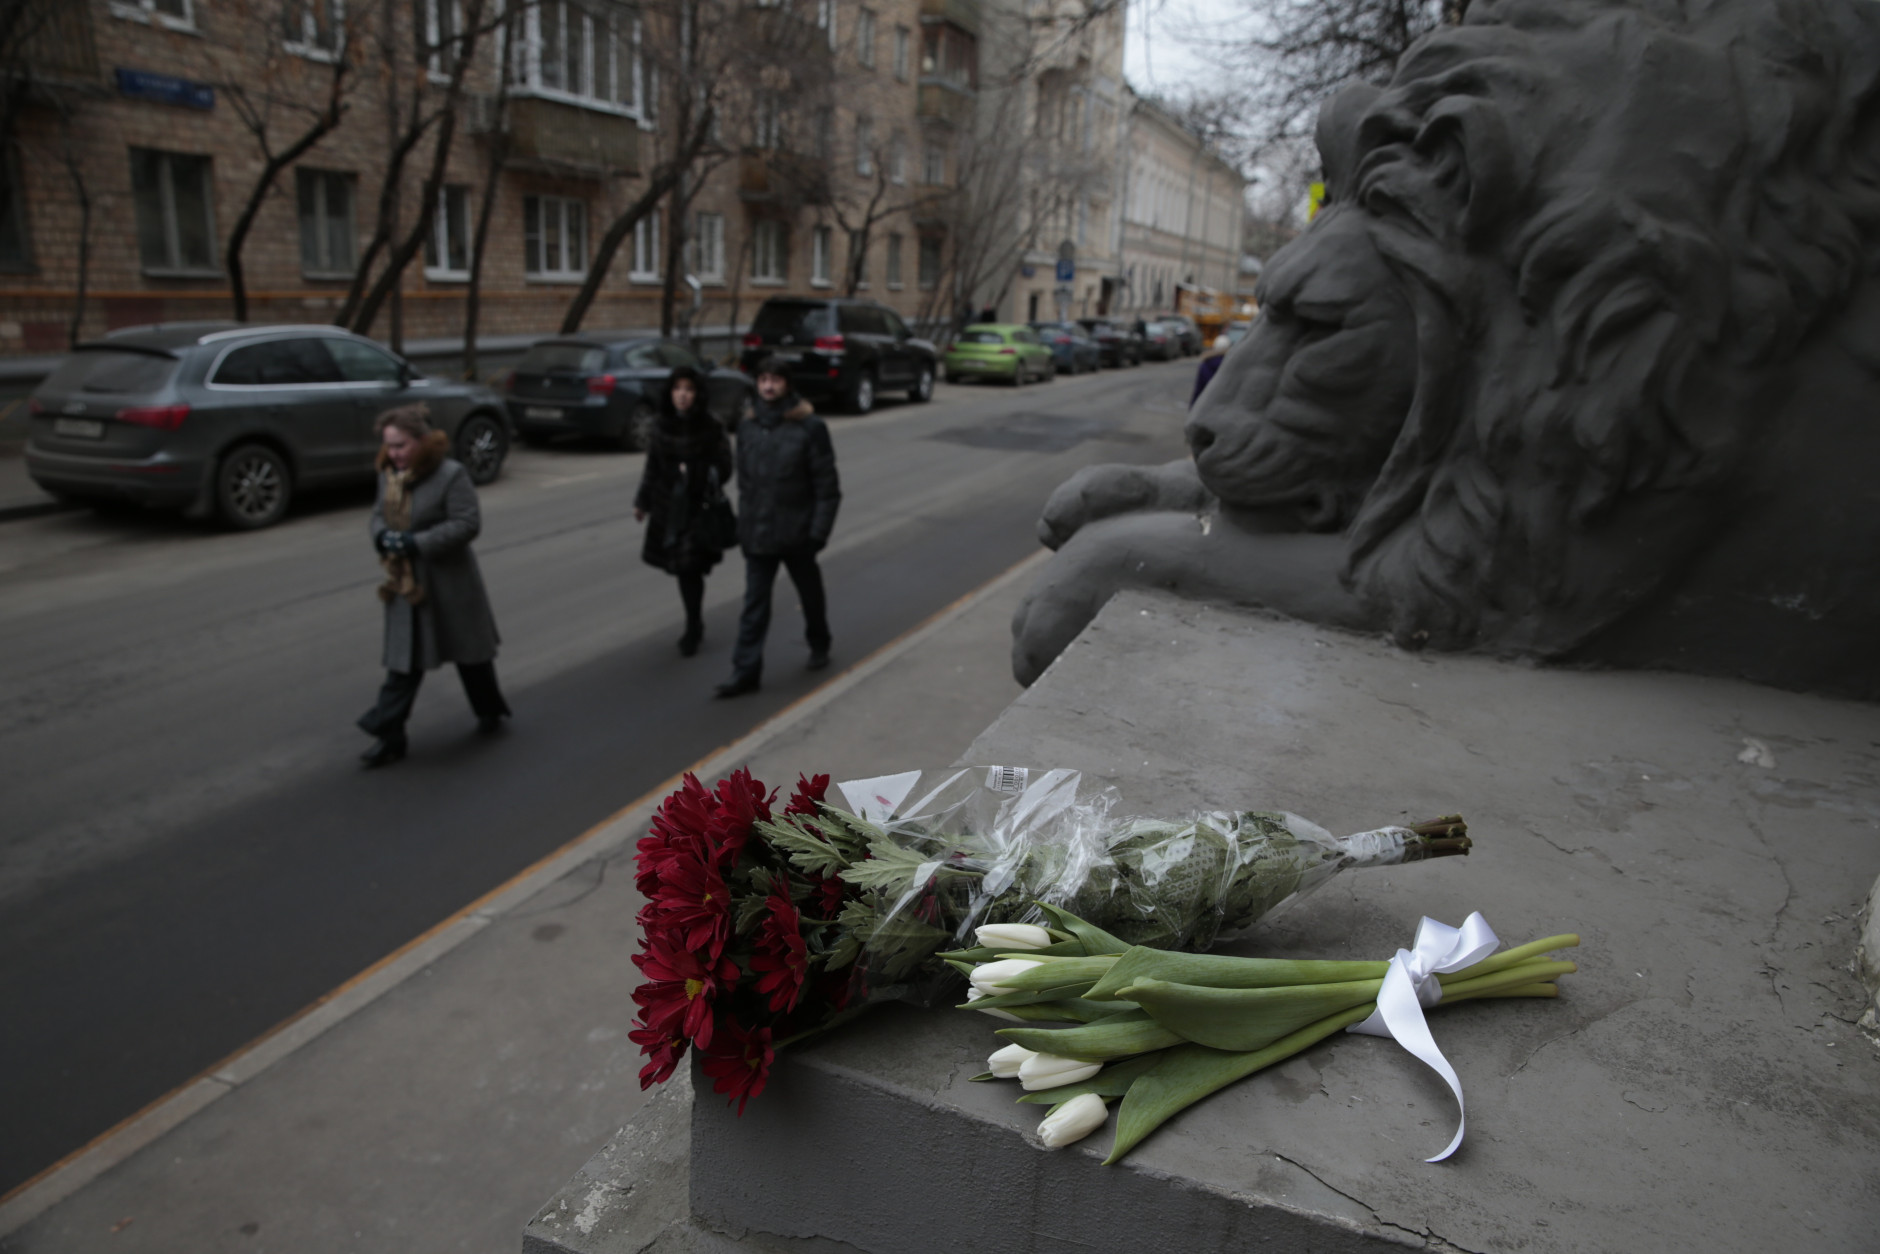 Flowers are placed outside the embassy of Belgium, in Moscow, Russia, Tuesday, March 22, 2016. Authorities in Europe have tightened security at airports, on subways, at the borders and on city streets after deadly attacks Tuesday on the Brussels airport and its subway system. (AP Photo/Pavel Golovkin)